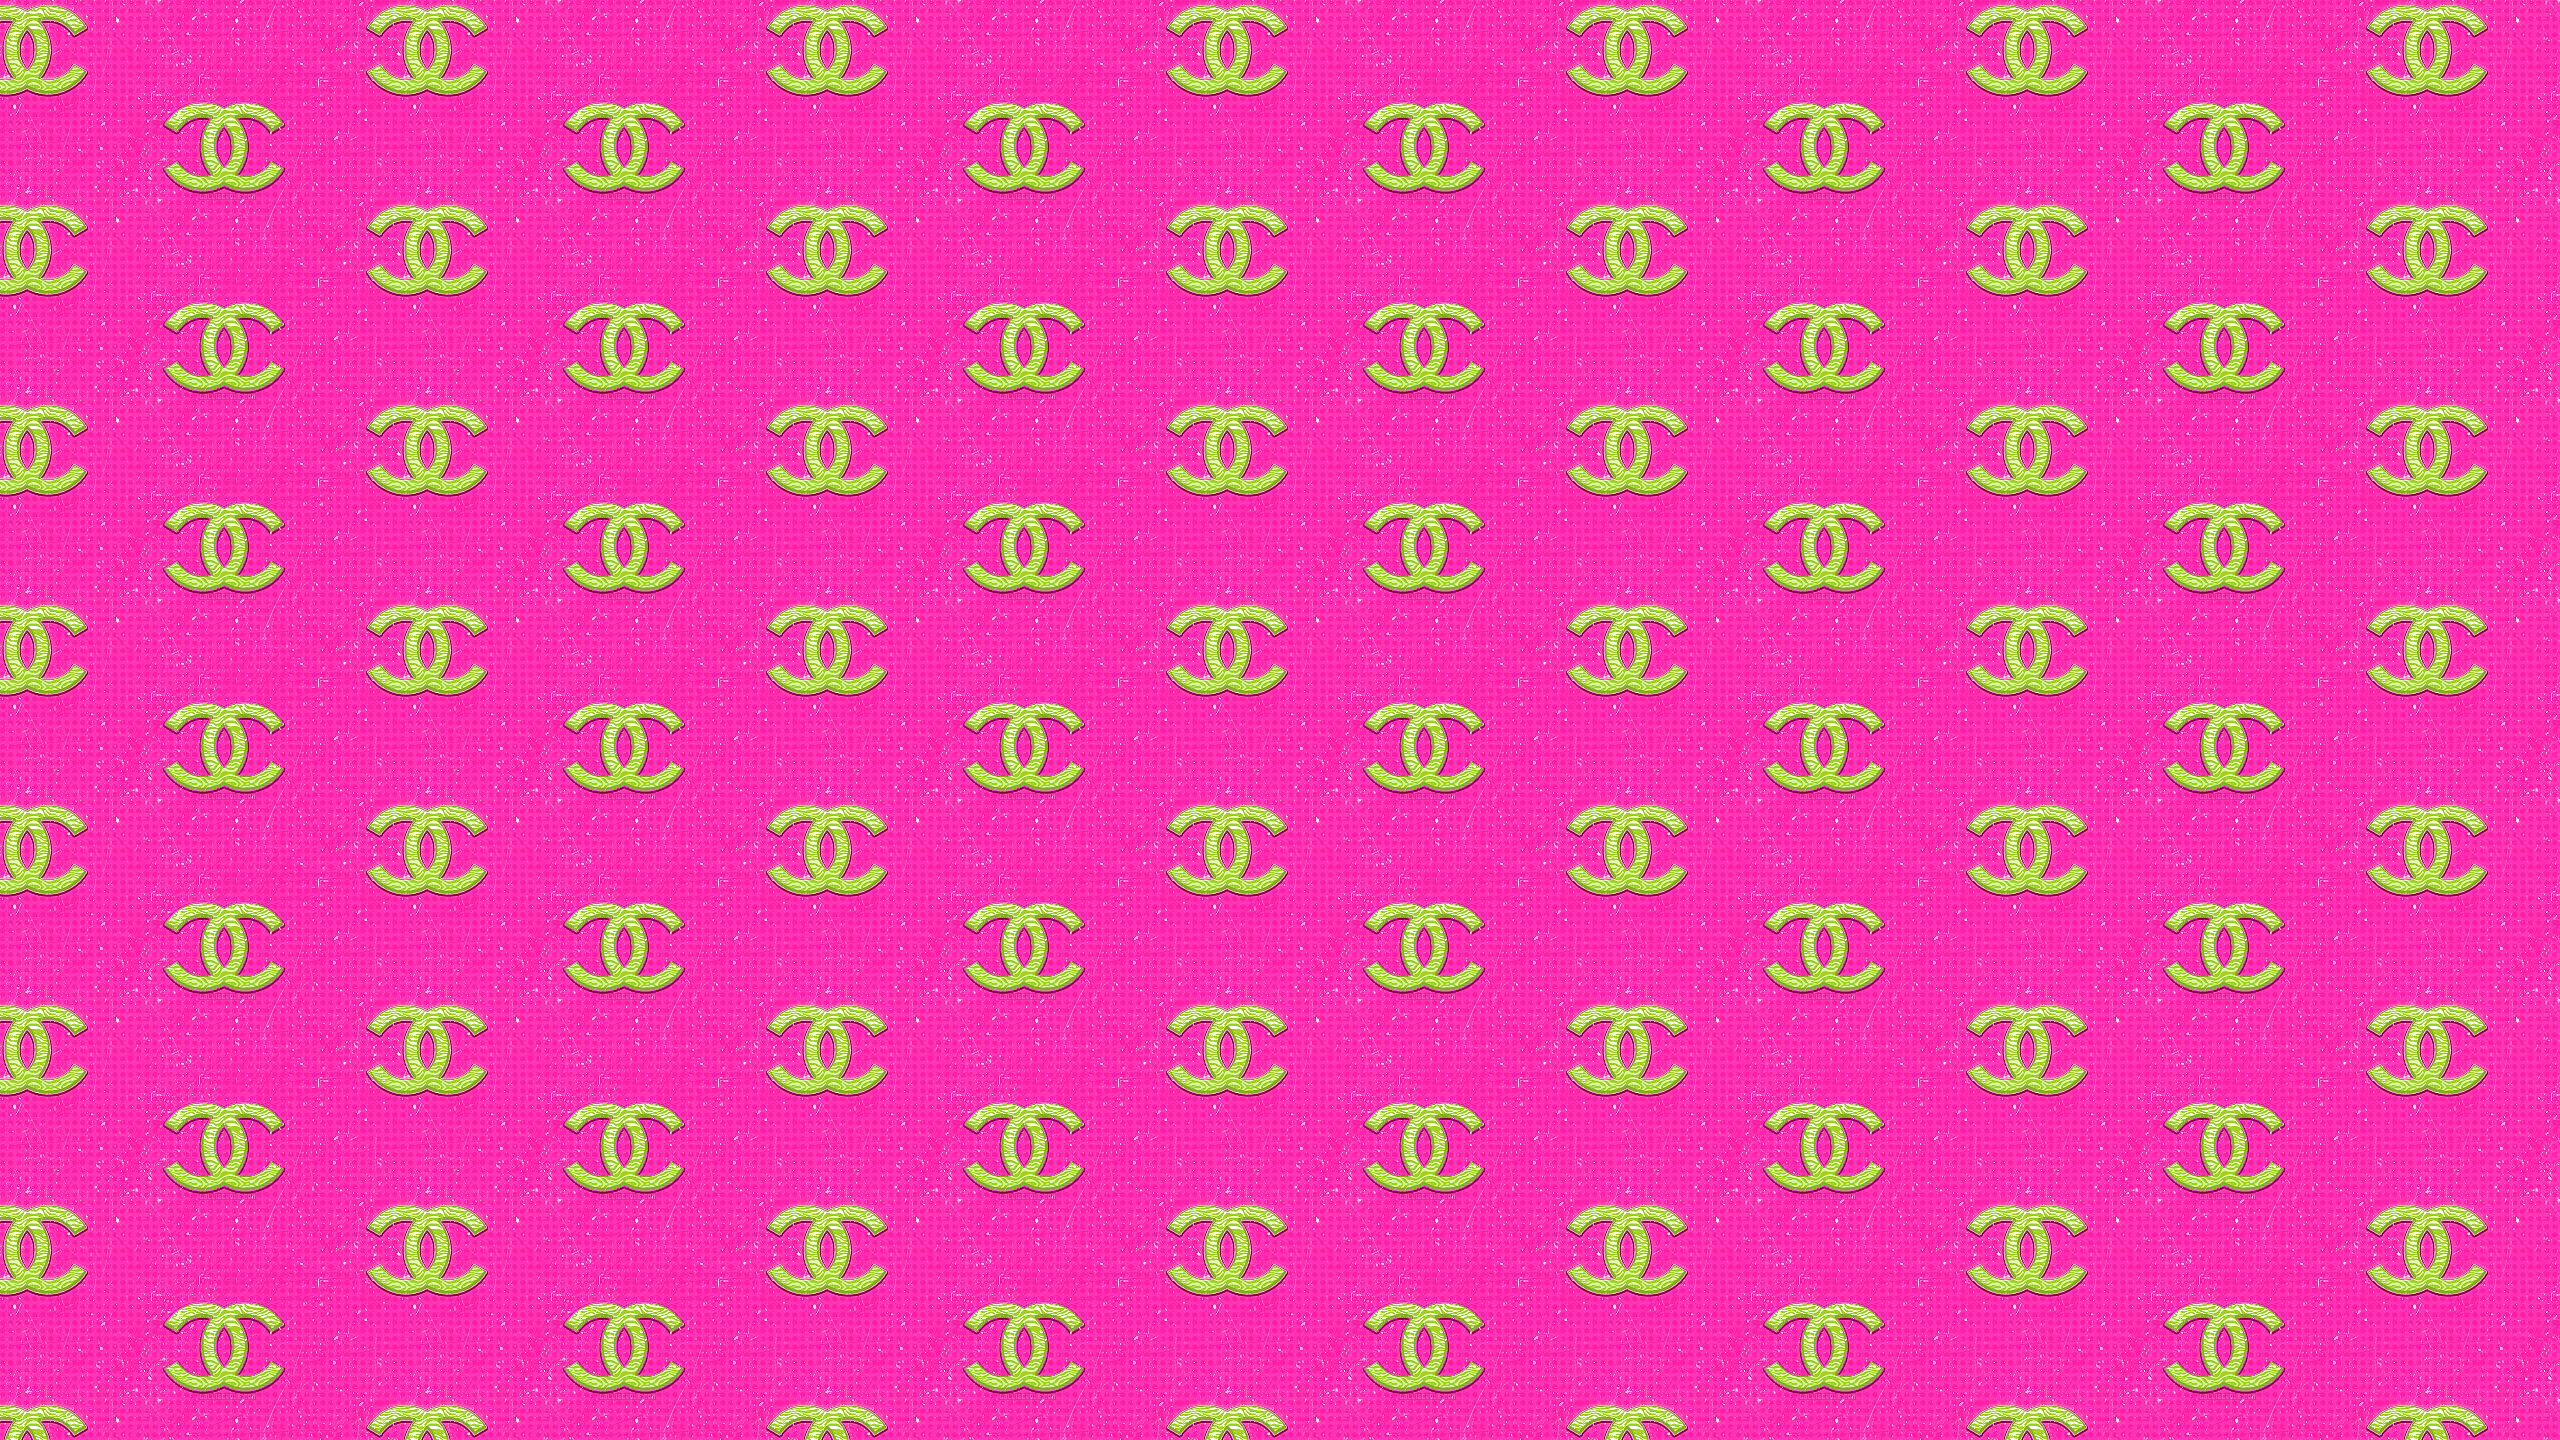 chanel pink and wallpaper image  Chanel wallpapers Animal print  wallpaper Iphone wallpaper